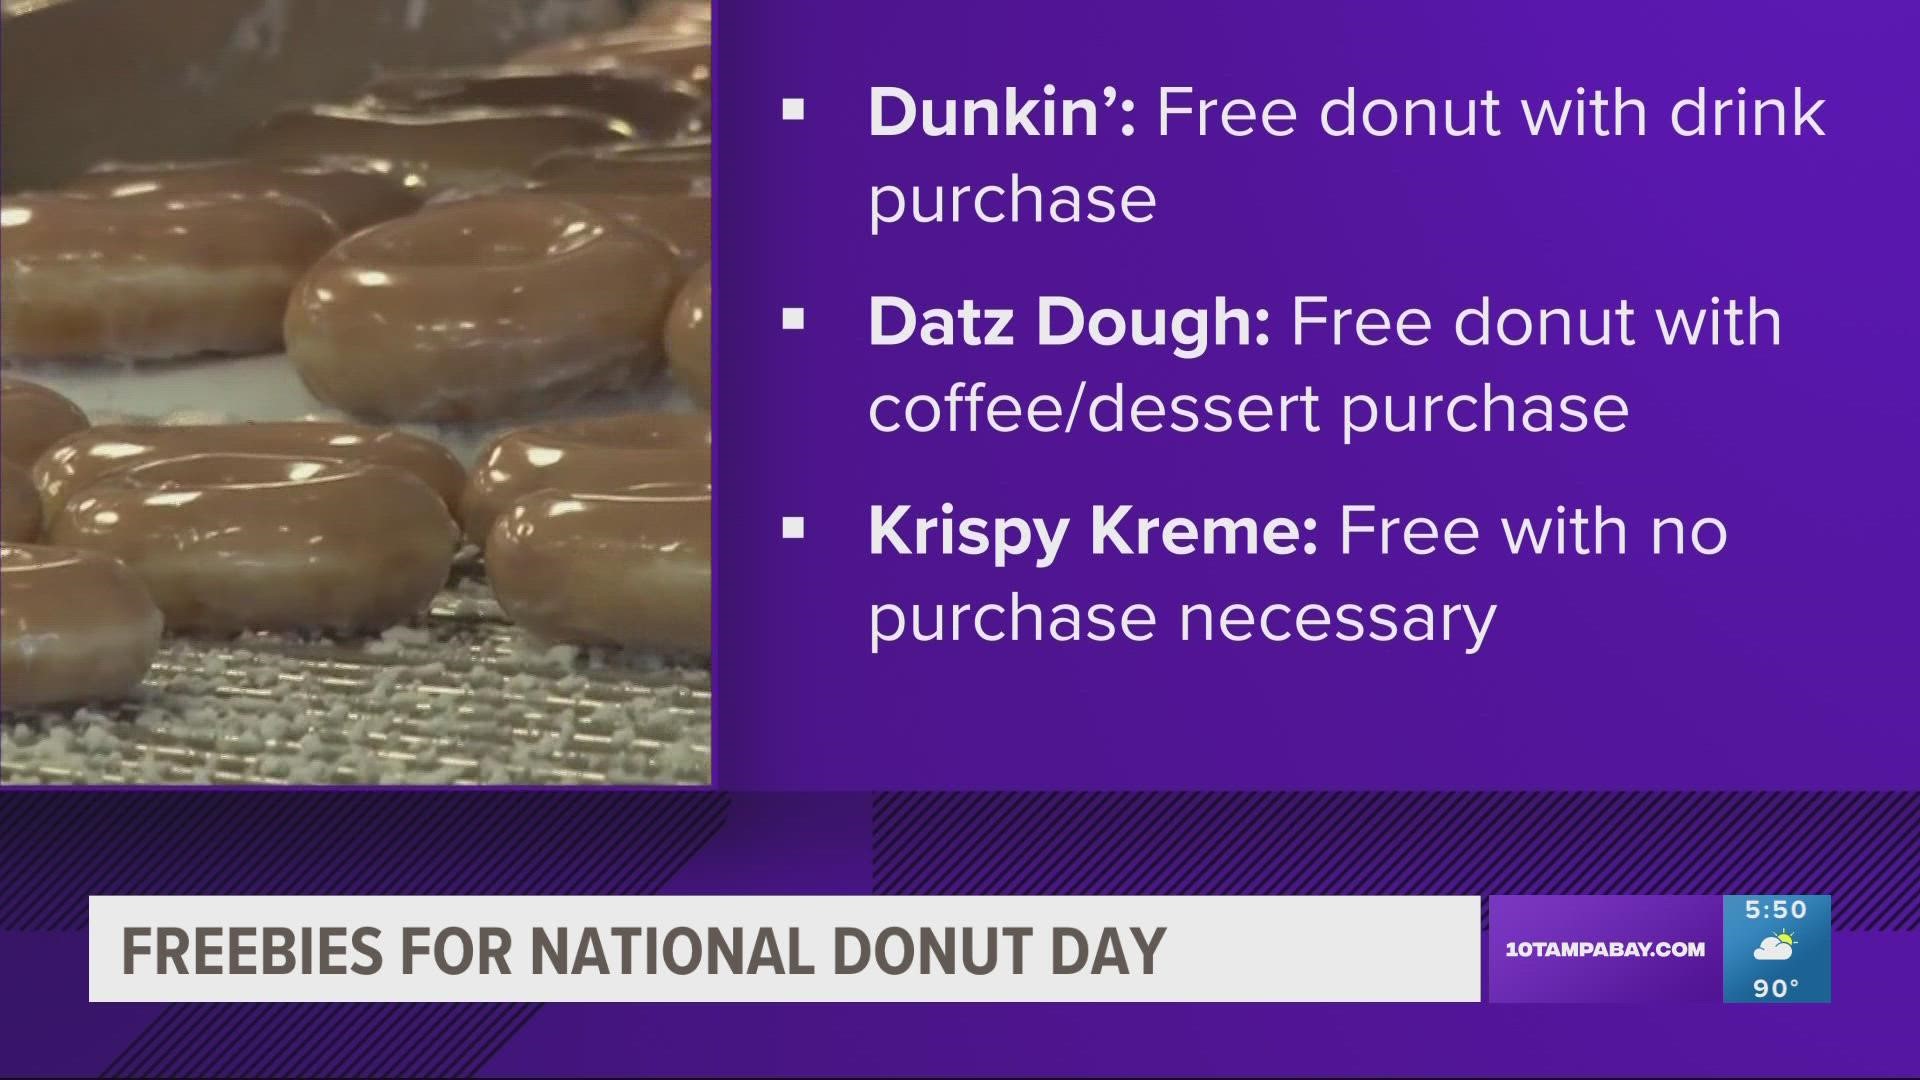 Dunkin', Datz Dough and Krispy Kreme offer a free donut with a purchase.